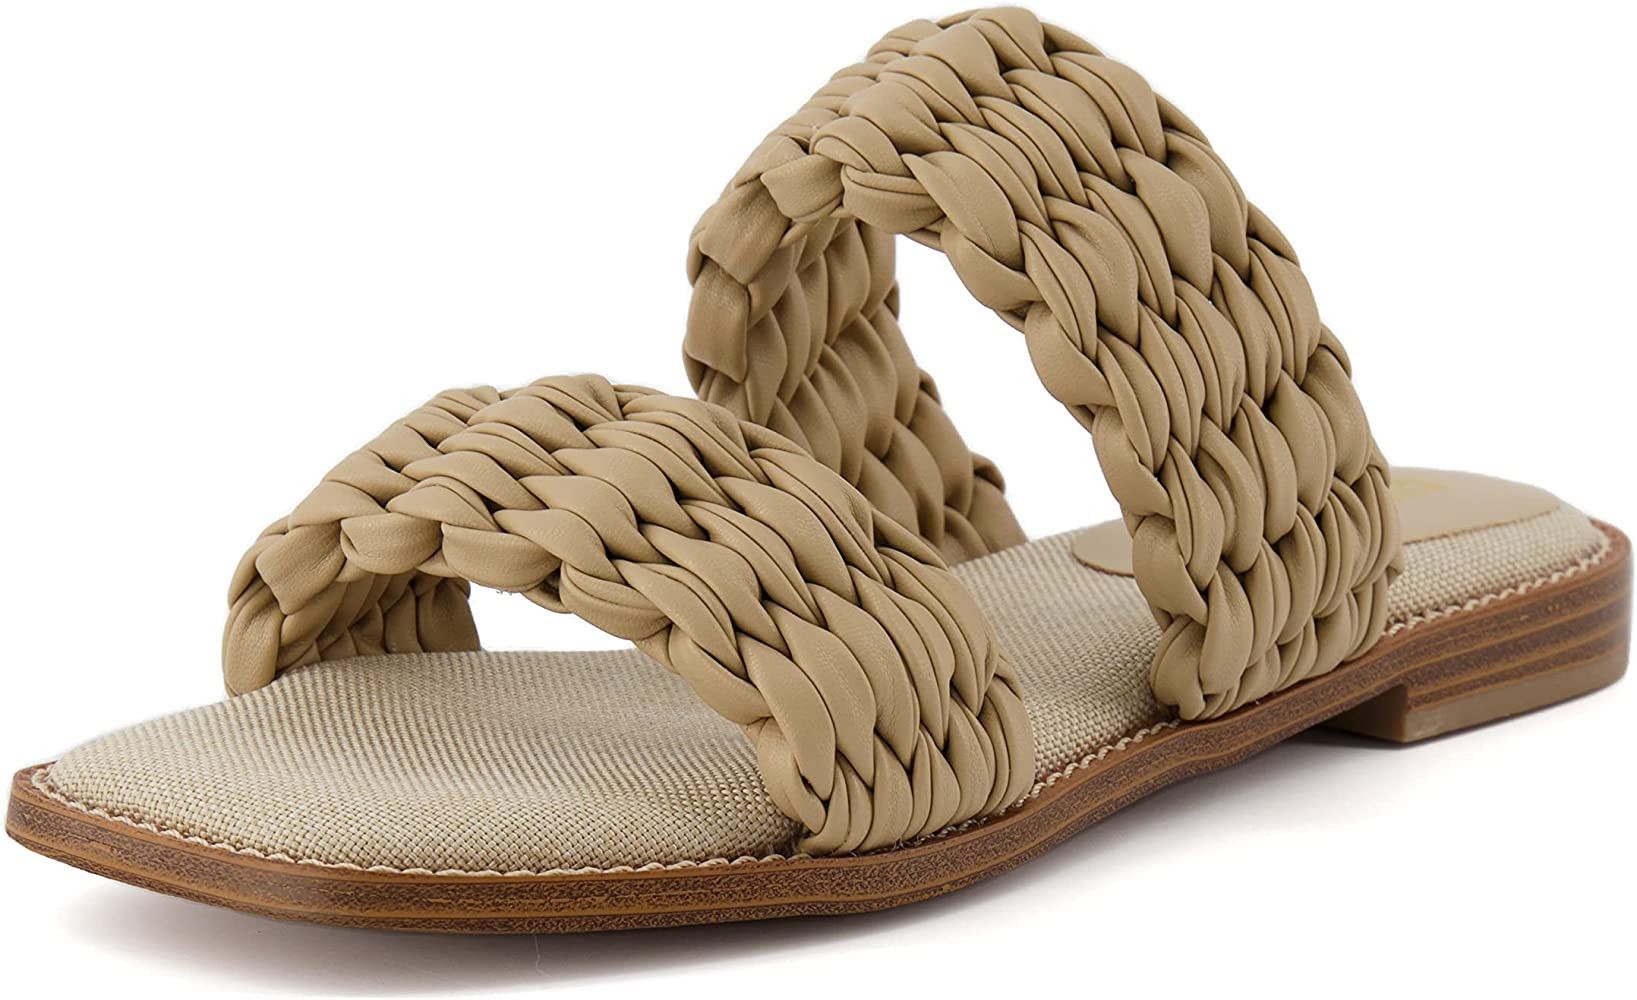 CUSHIONAIRE Women's Vibe braided two band sandal +Memory Foam, Wide Widths Available | Amazon (US)